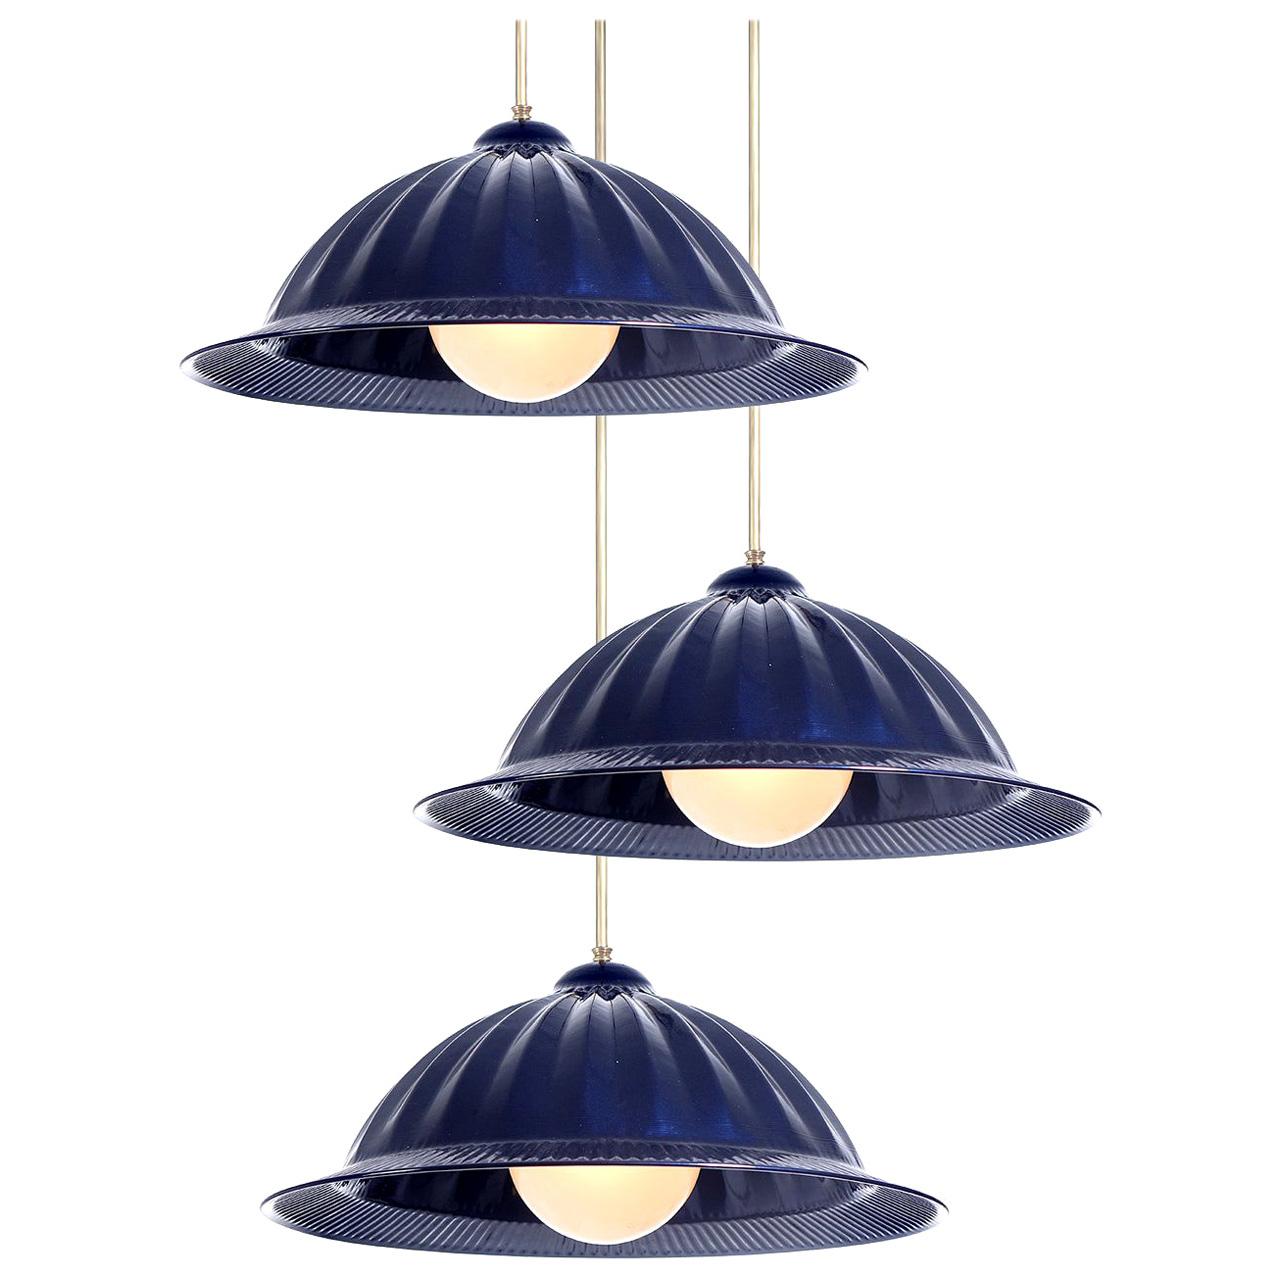 Large Pleated Cobalt Blue Dome